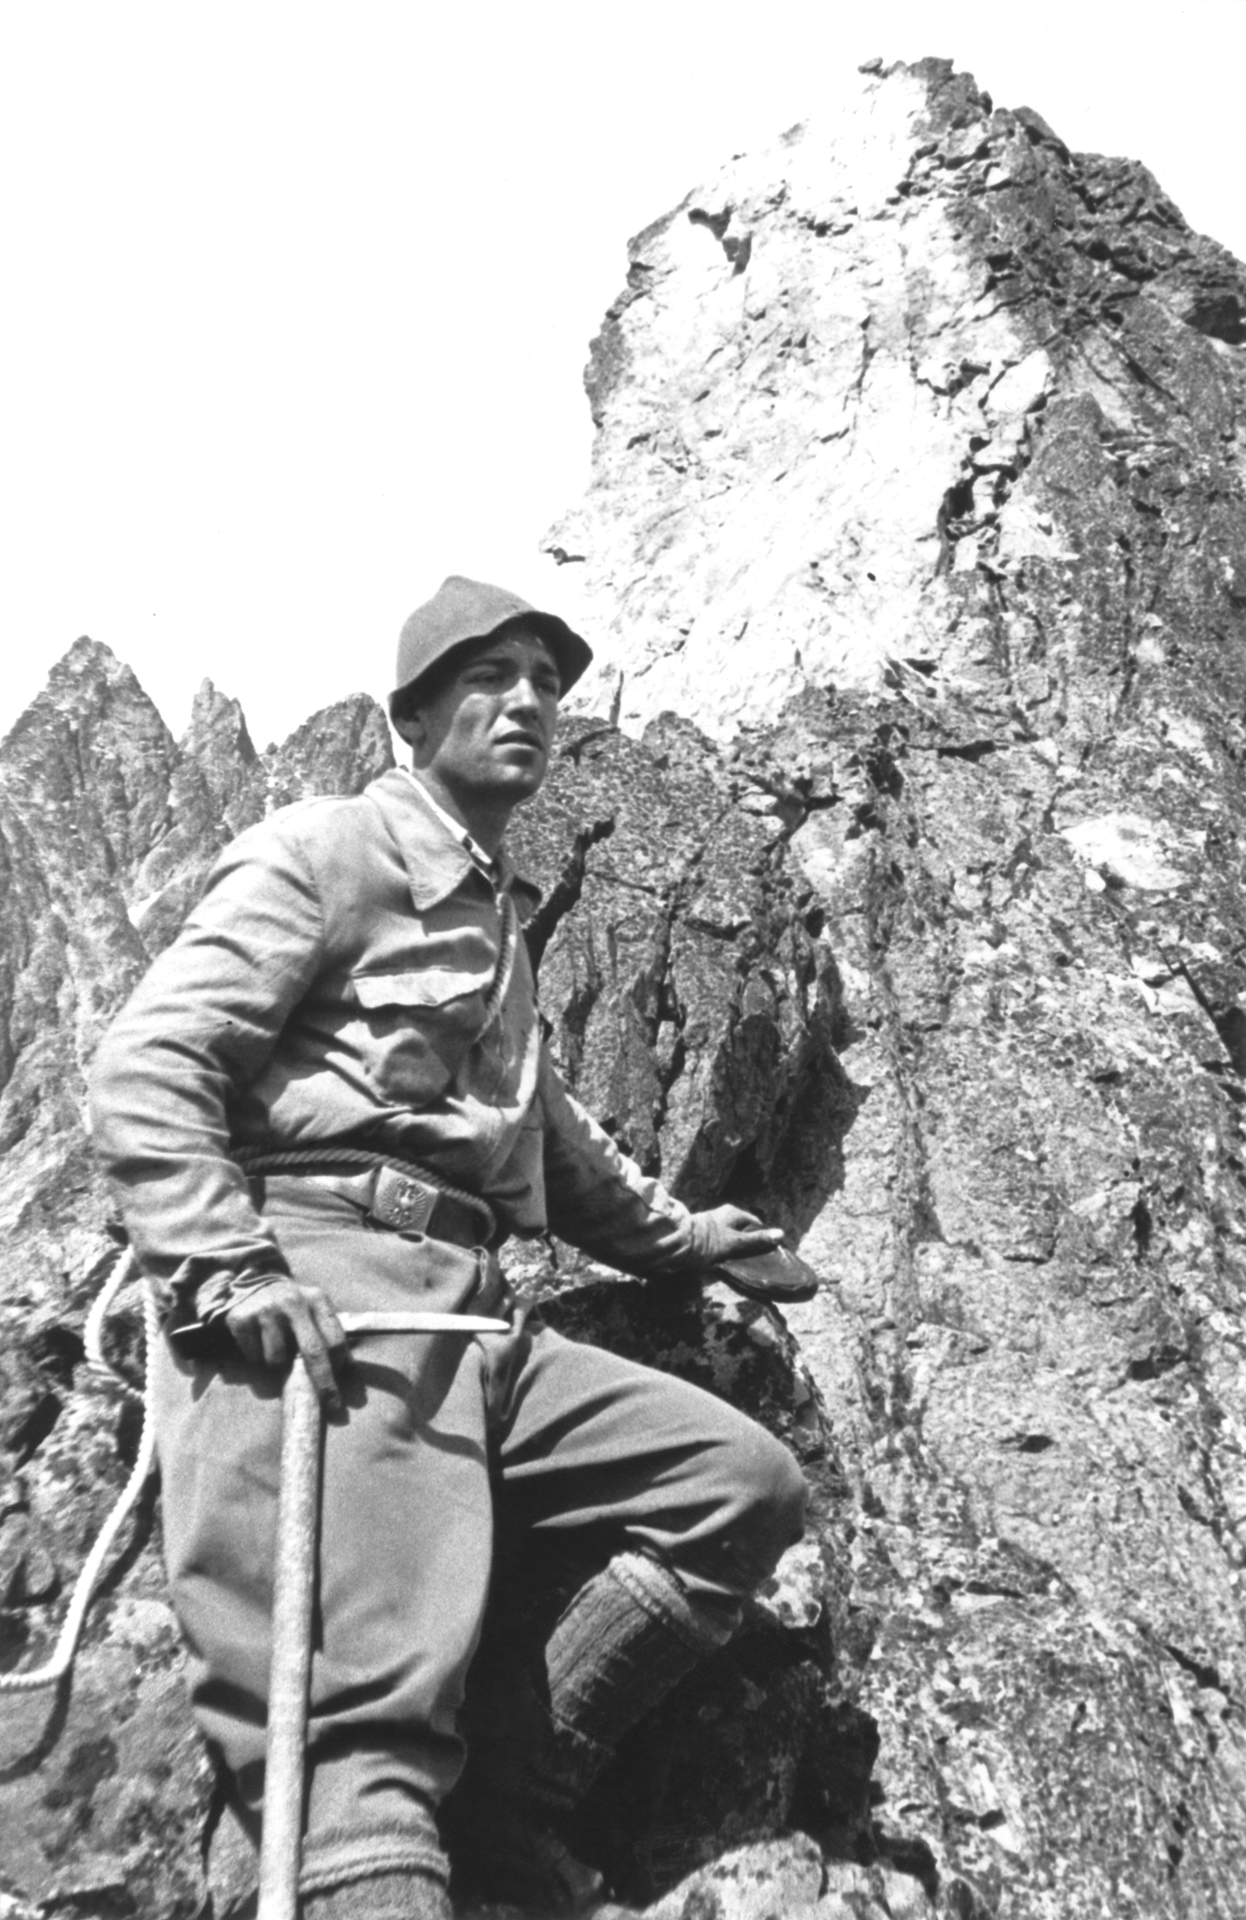 Black and white portrait. A young man stands against a rock face. He is leaning on a stick with a pointed iron. He is wearing thick woollen clothing, a hat and gloves. A rope is tied around his waist.